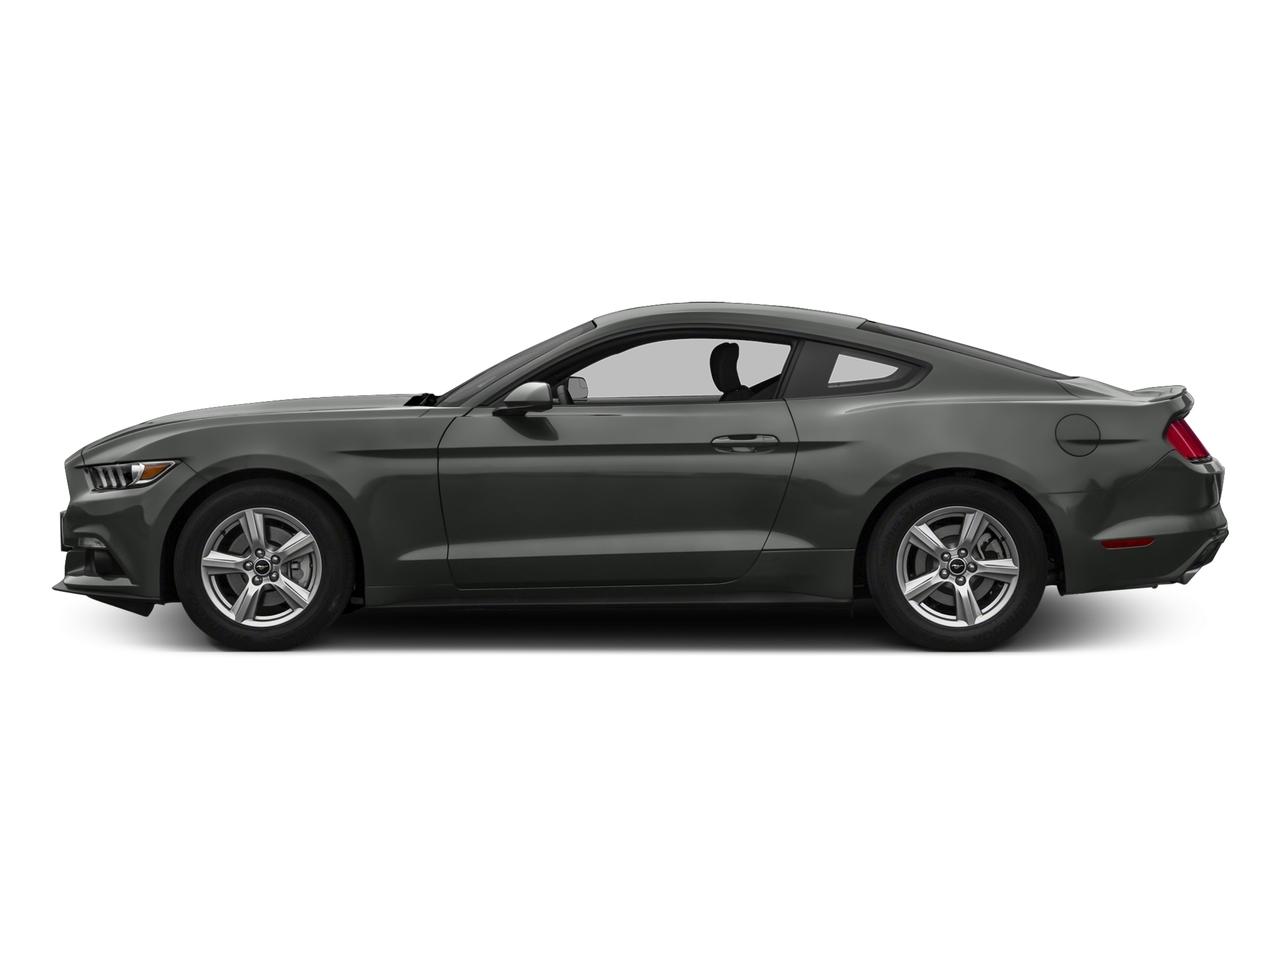 2017 Ford Mustang Vehicle Photo in Saint Charles, IL 60174